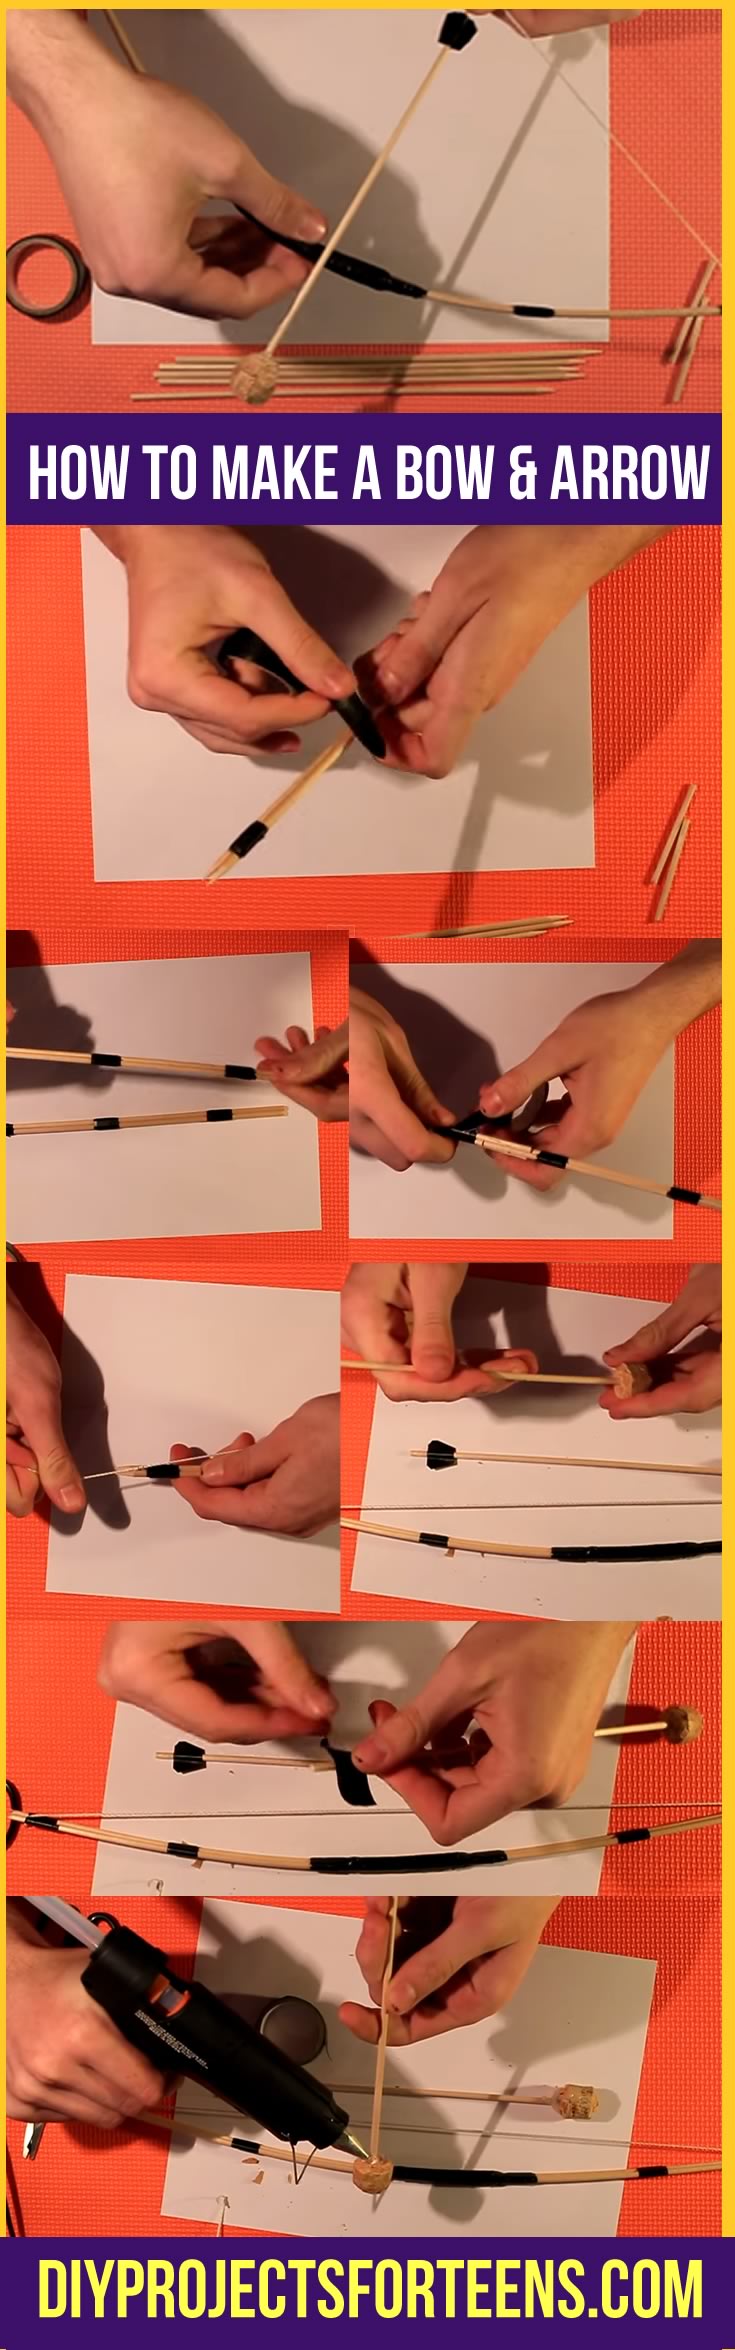 Cool DIY Crafts for Teens and Tweens | How To Make A Bow and Arrow | Mini DIY Bow and Arrow Tutorial and Video